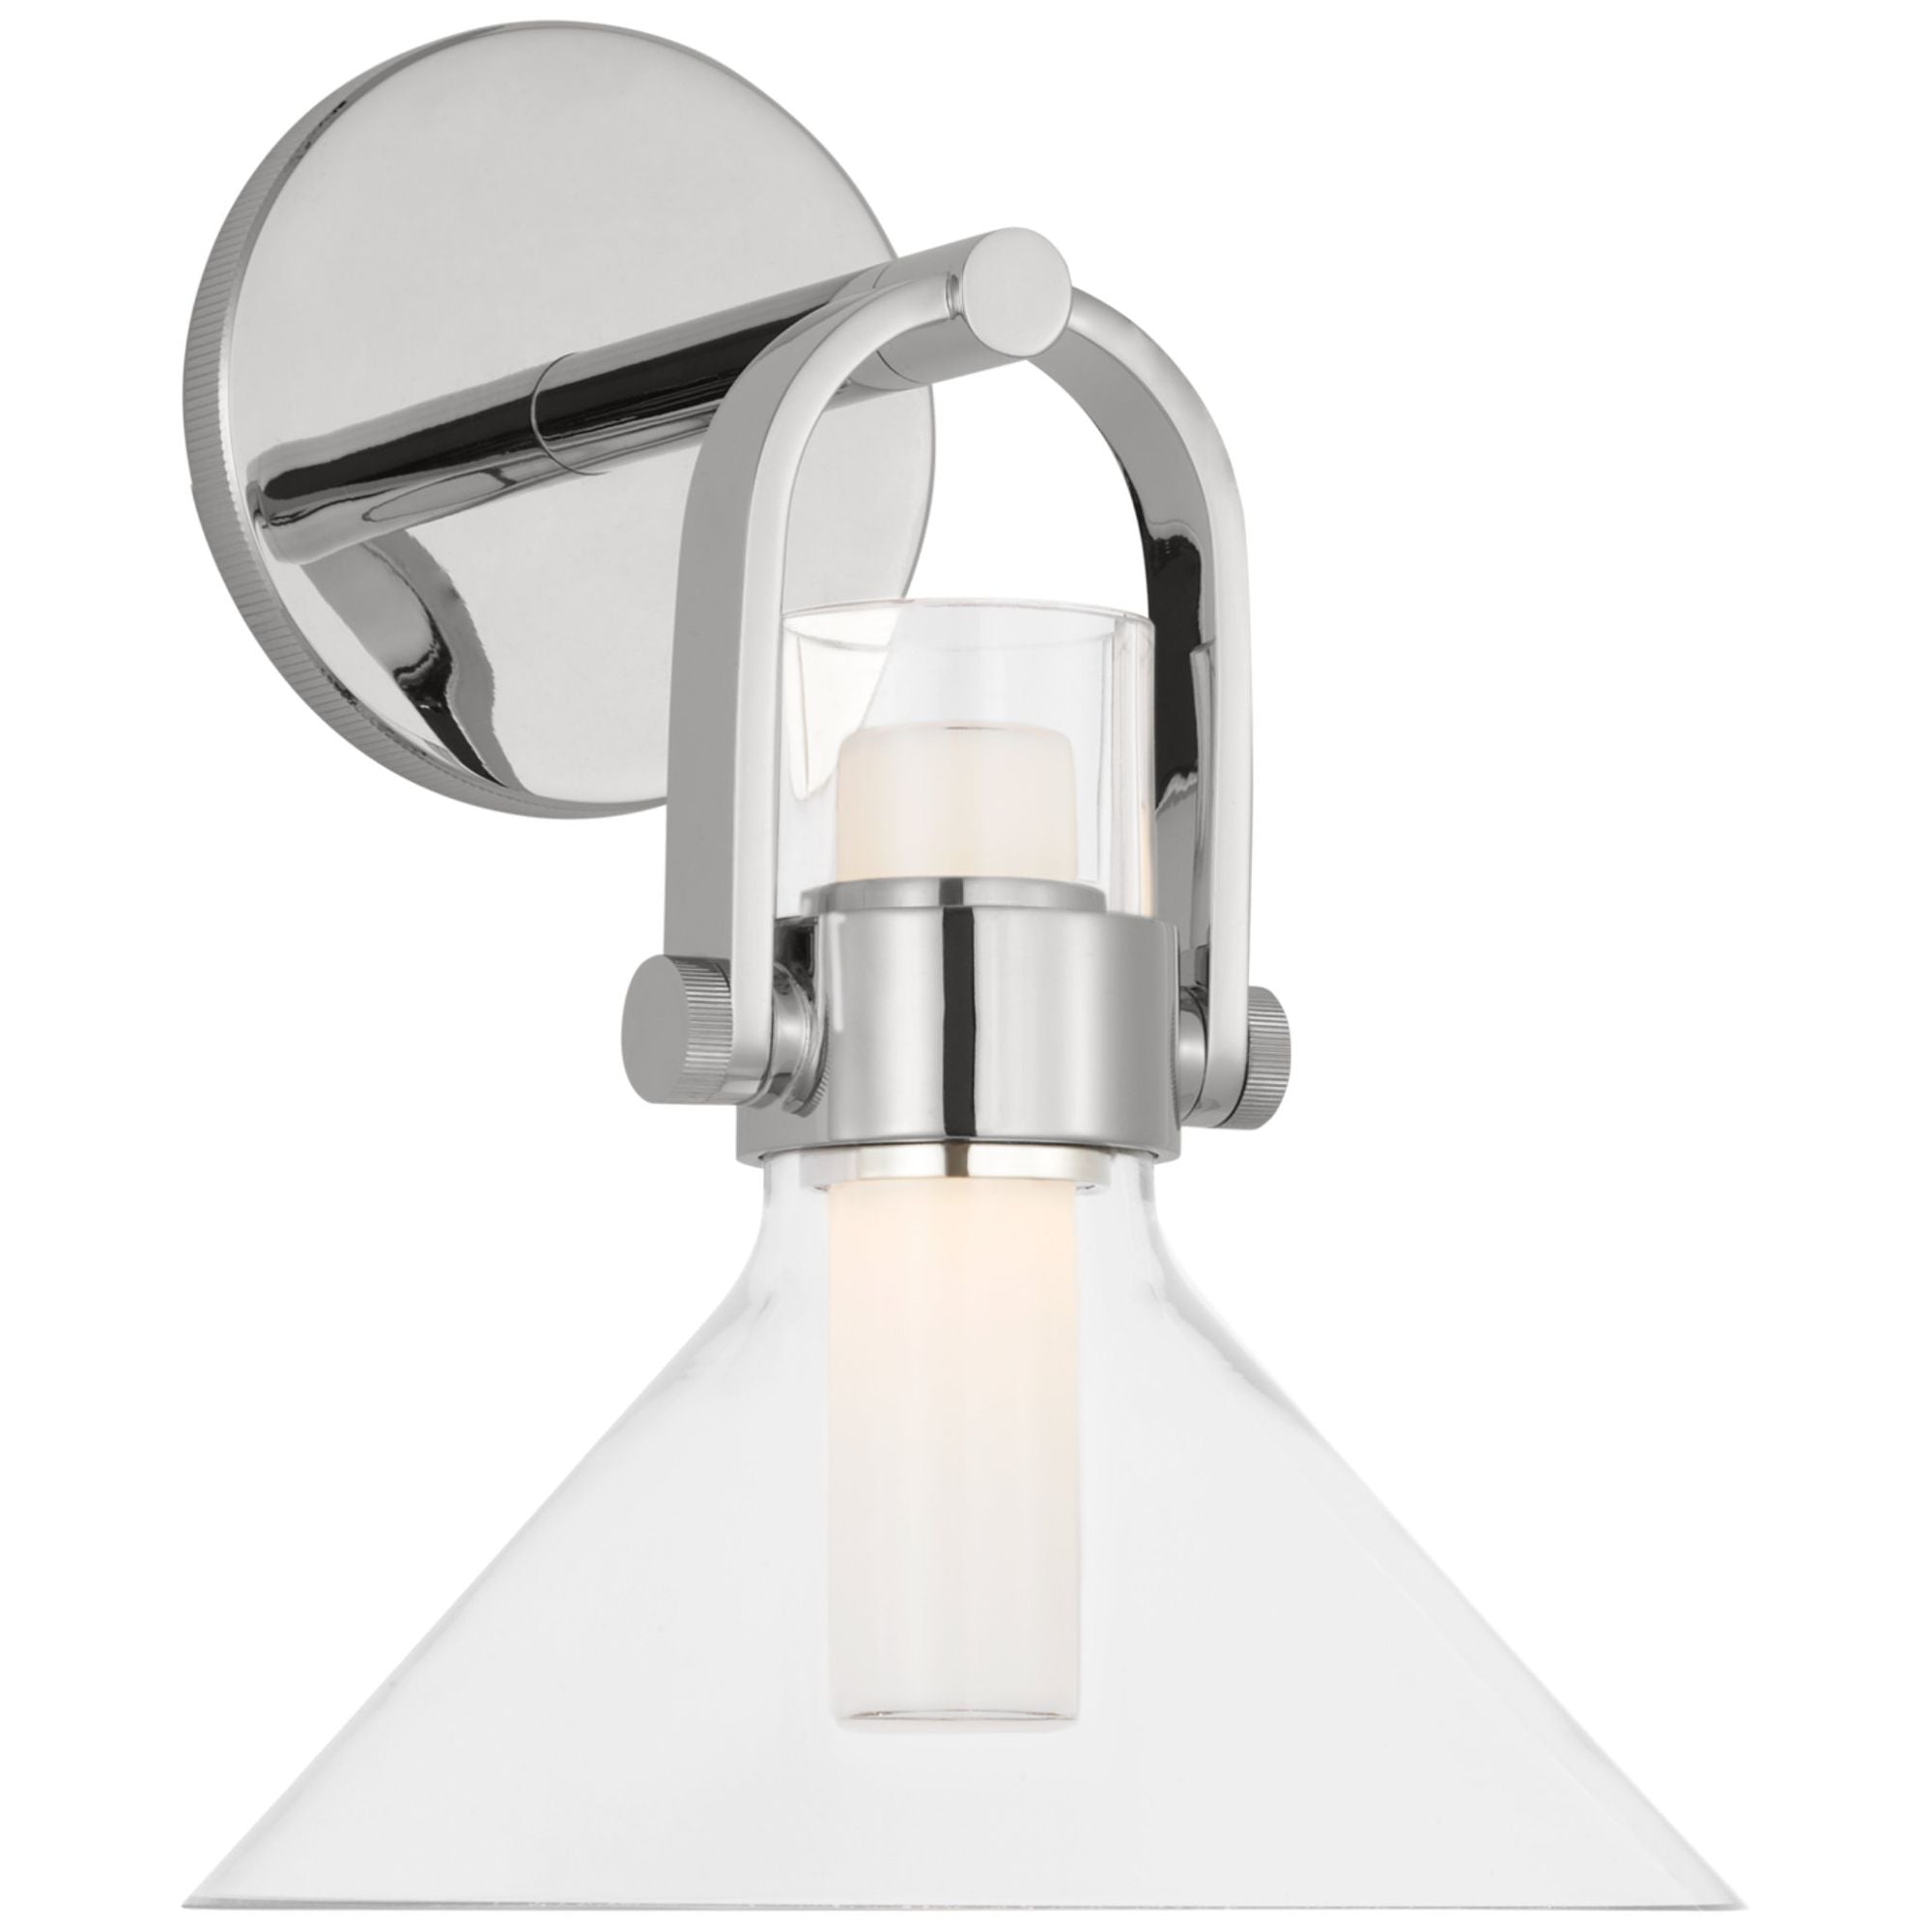 Ian K. Fowler Larkin Small Empire Bracketed Sconce in Polished Nickel with Clear Glass